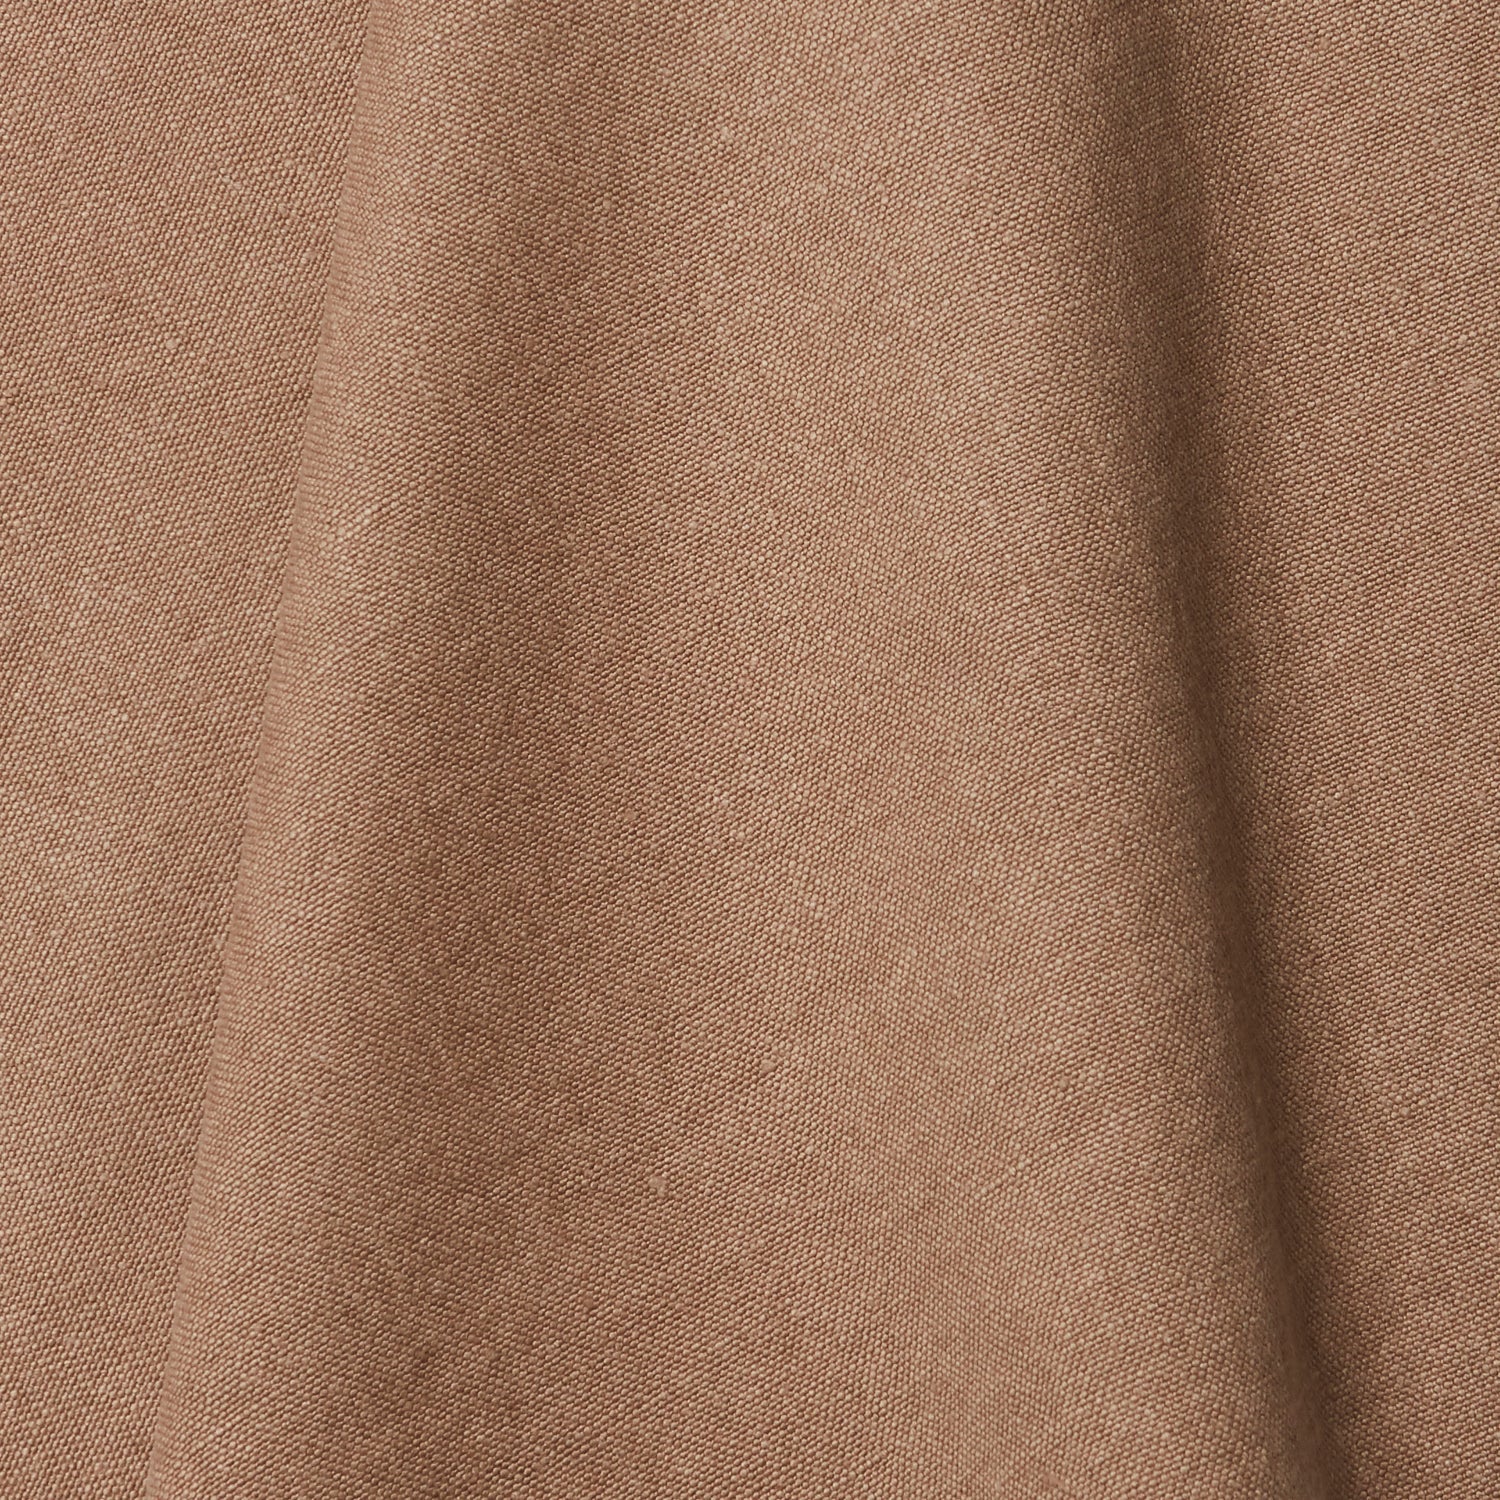 A draped swatch of linen fabric in a solid light brown color.